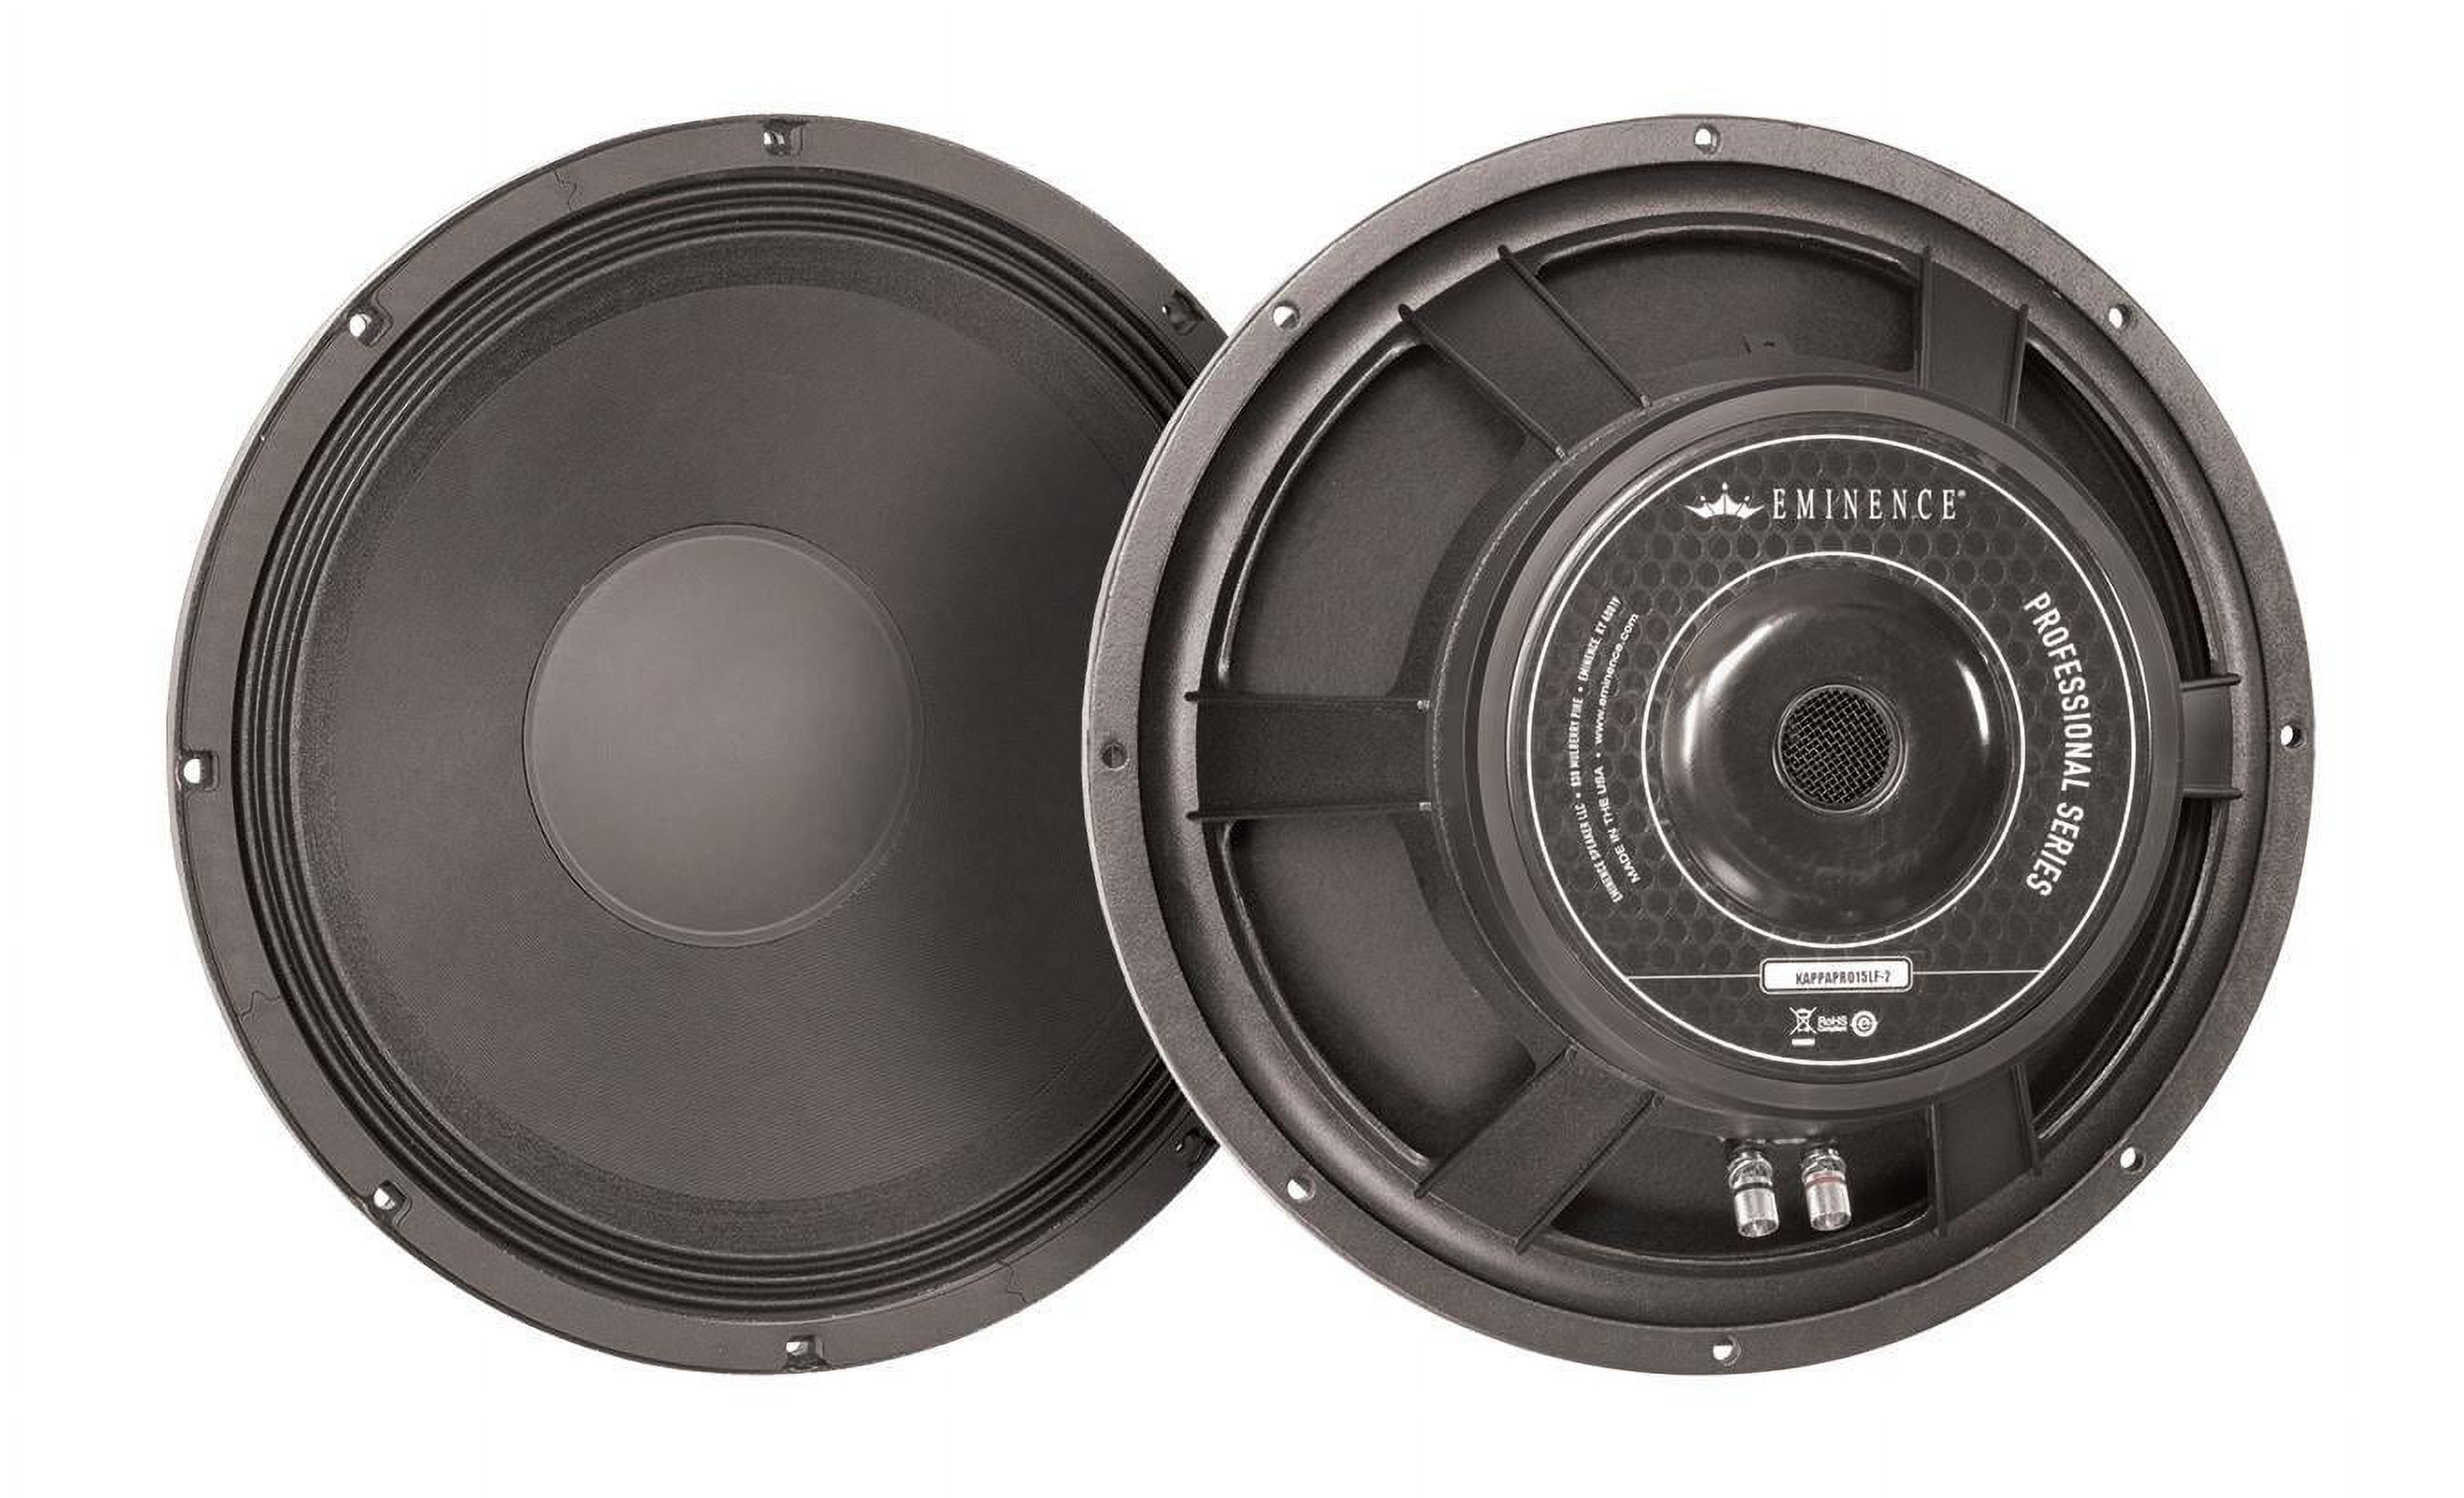 Eminence Professional Series Kappa Pro 15LF2 15" Pro Audio Speaker with Extended Bass, 600 Watts at 8 Ohms, Black - image 1 of 3